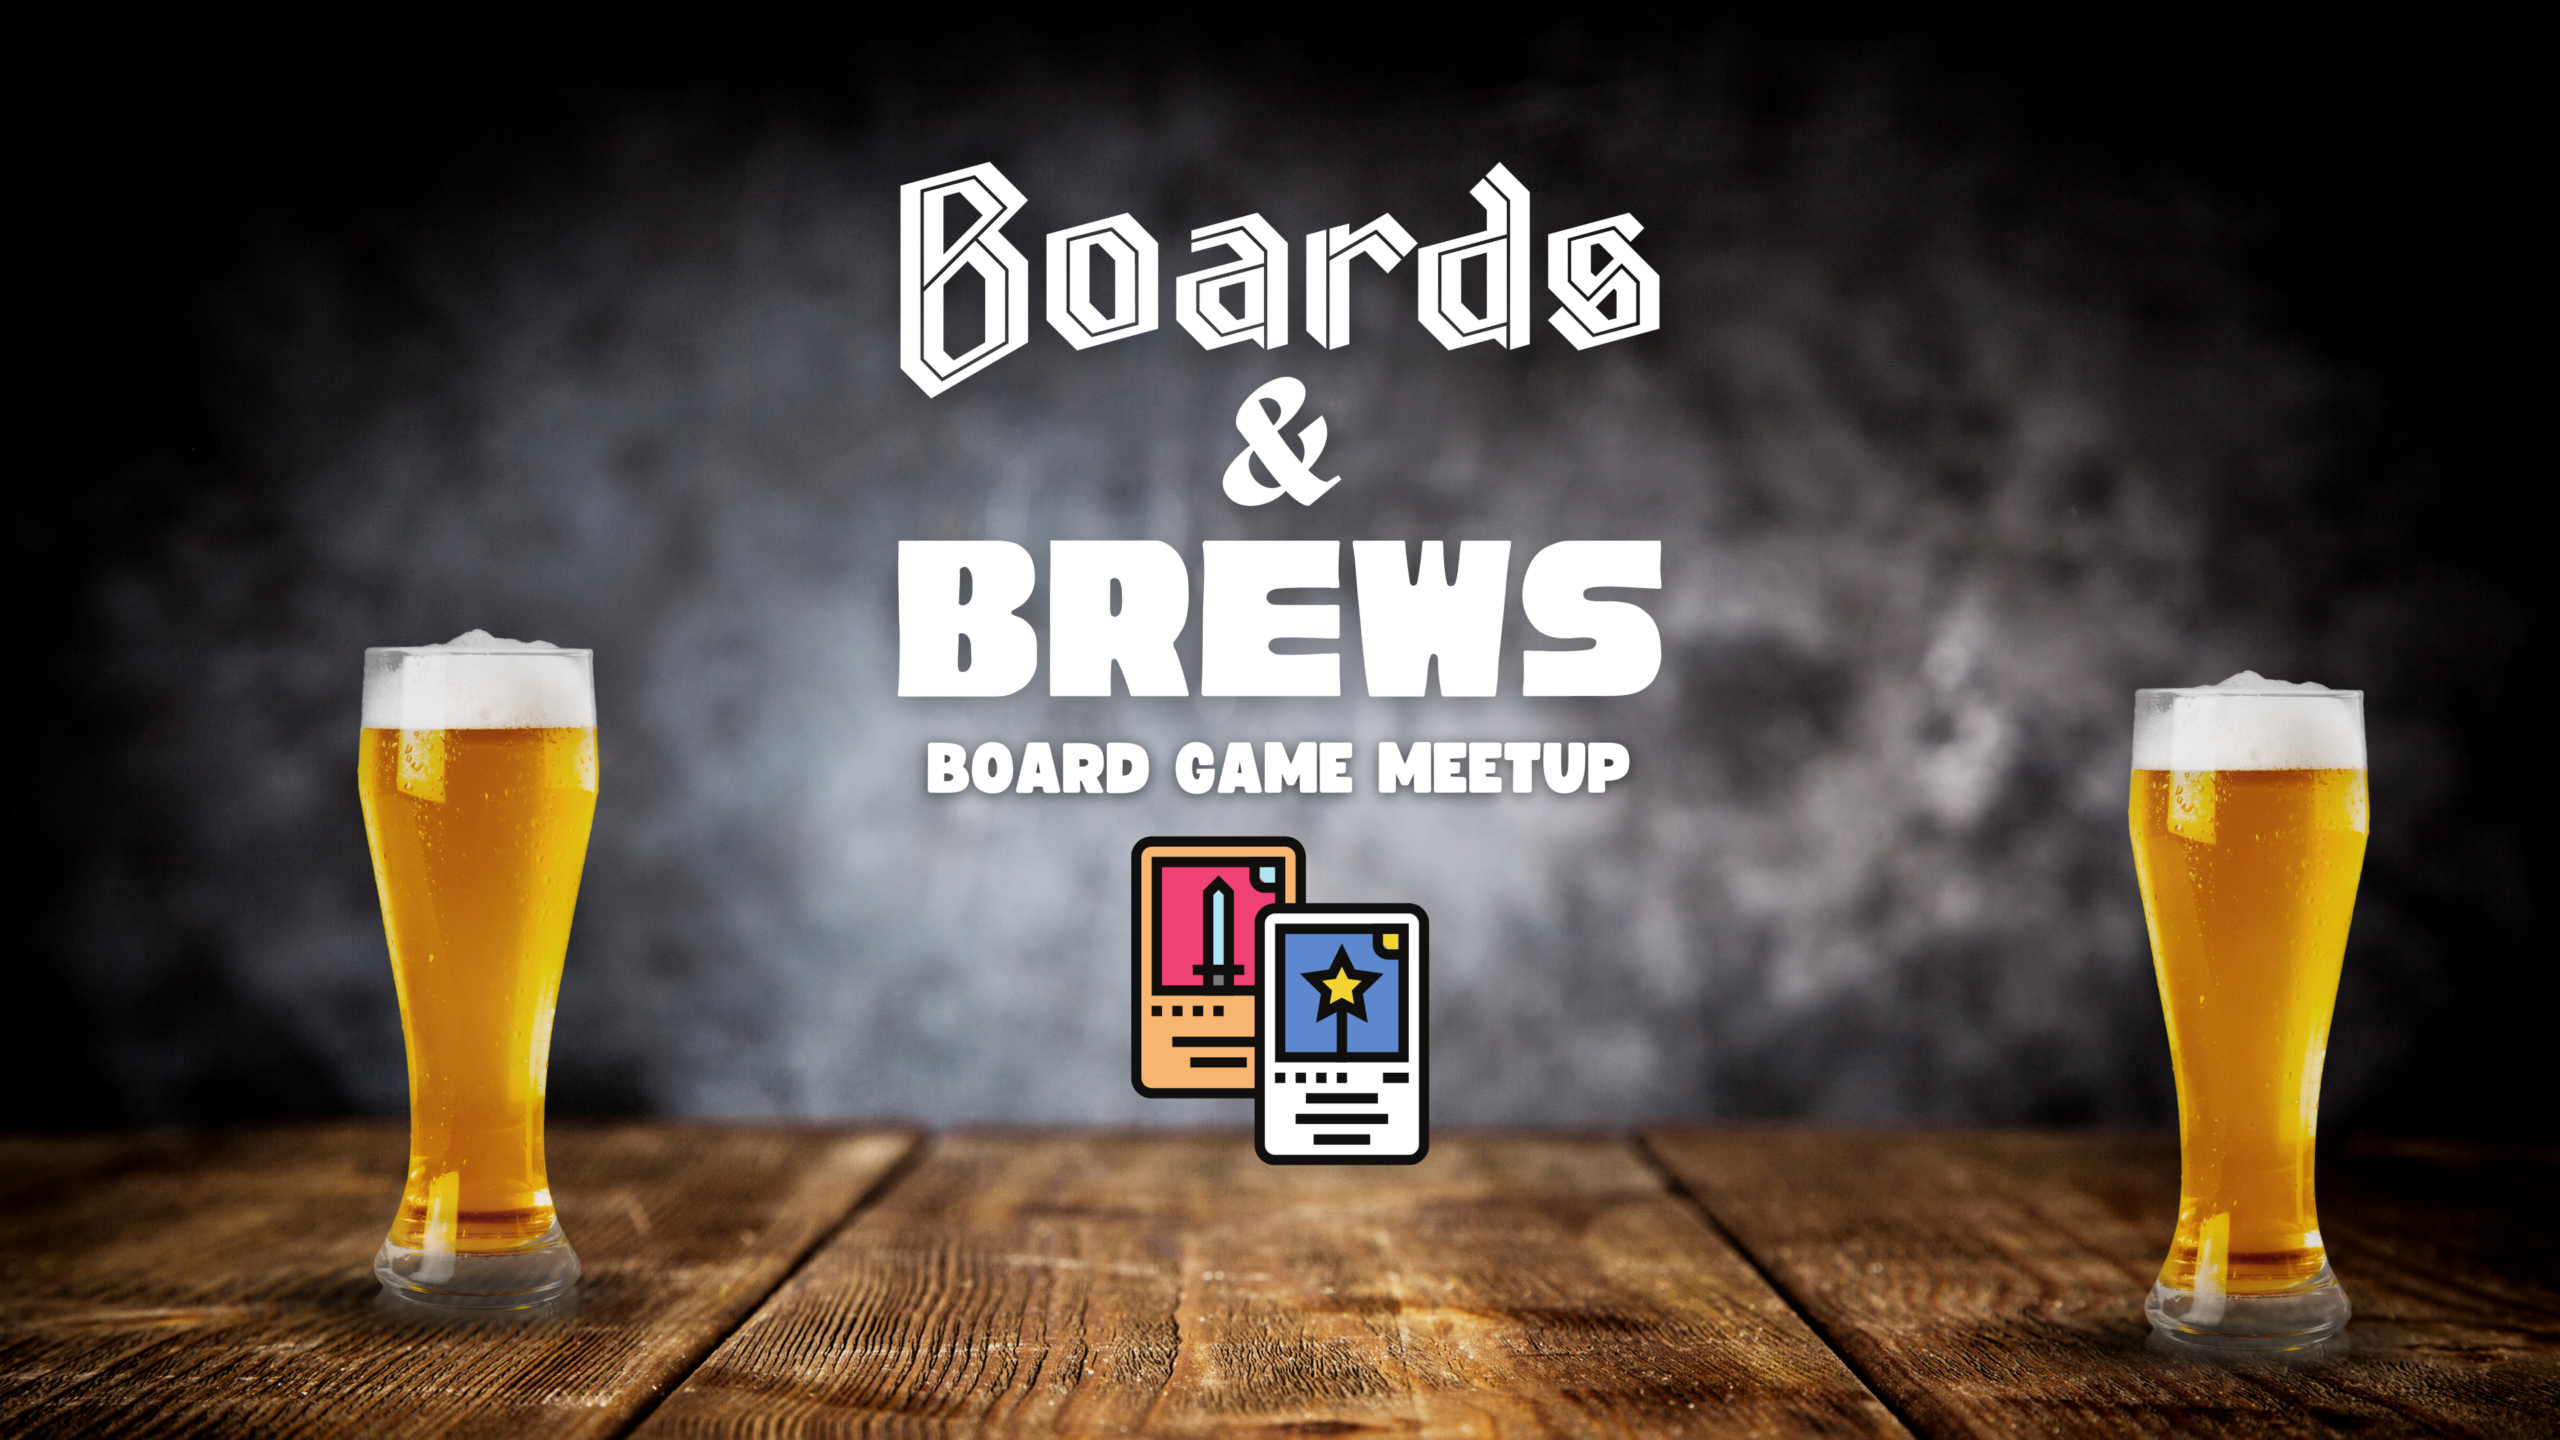 Boards & Brews Monthly Board Game Meetup at On Rotation